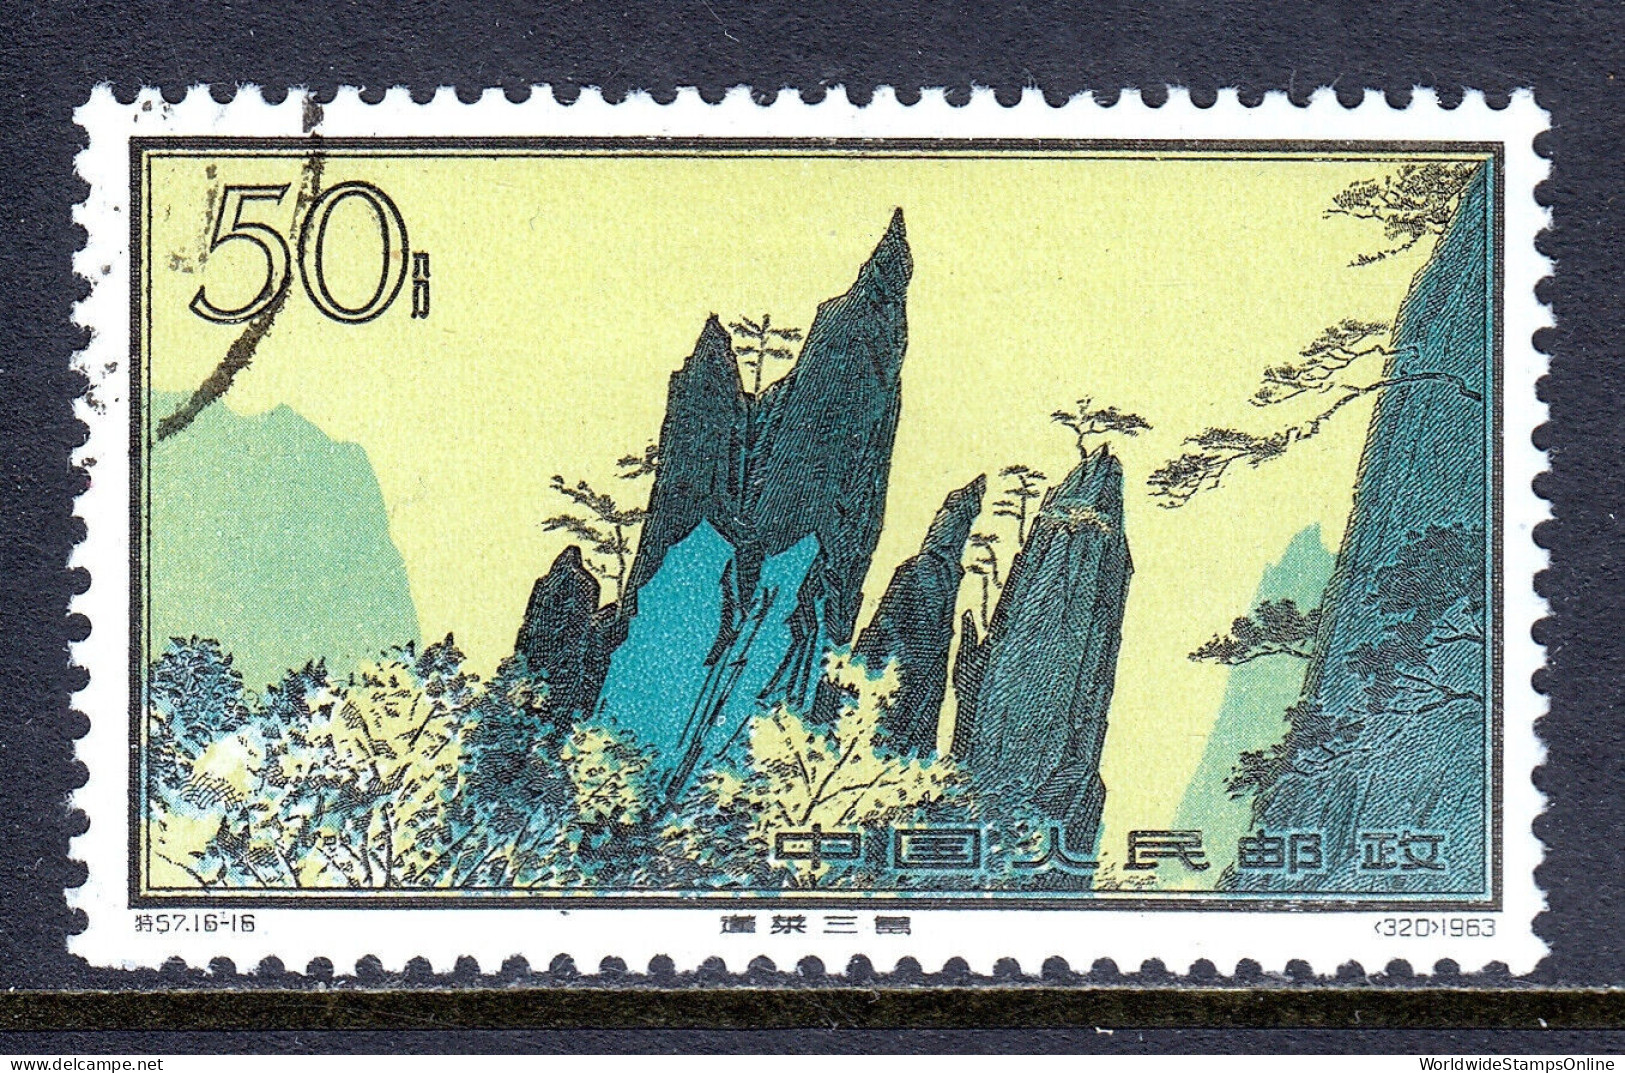 CHINA (P. R.) — SCOTT 731 — 1963 50f FAIRY TALES OF PEN LAI — USED/CTO — SCV $50 - Used Stamps